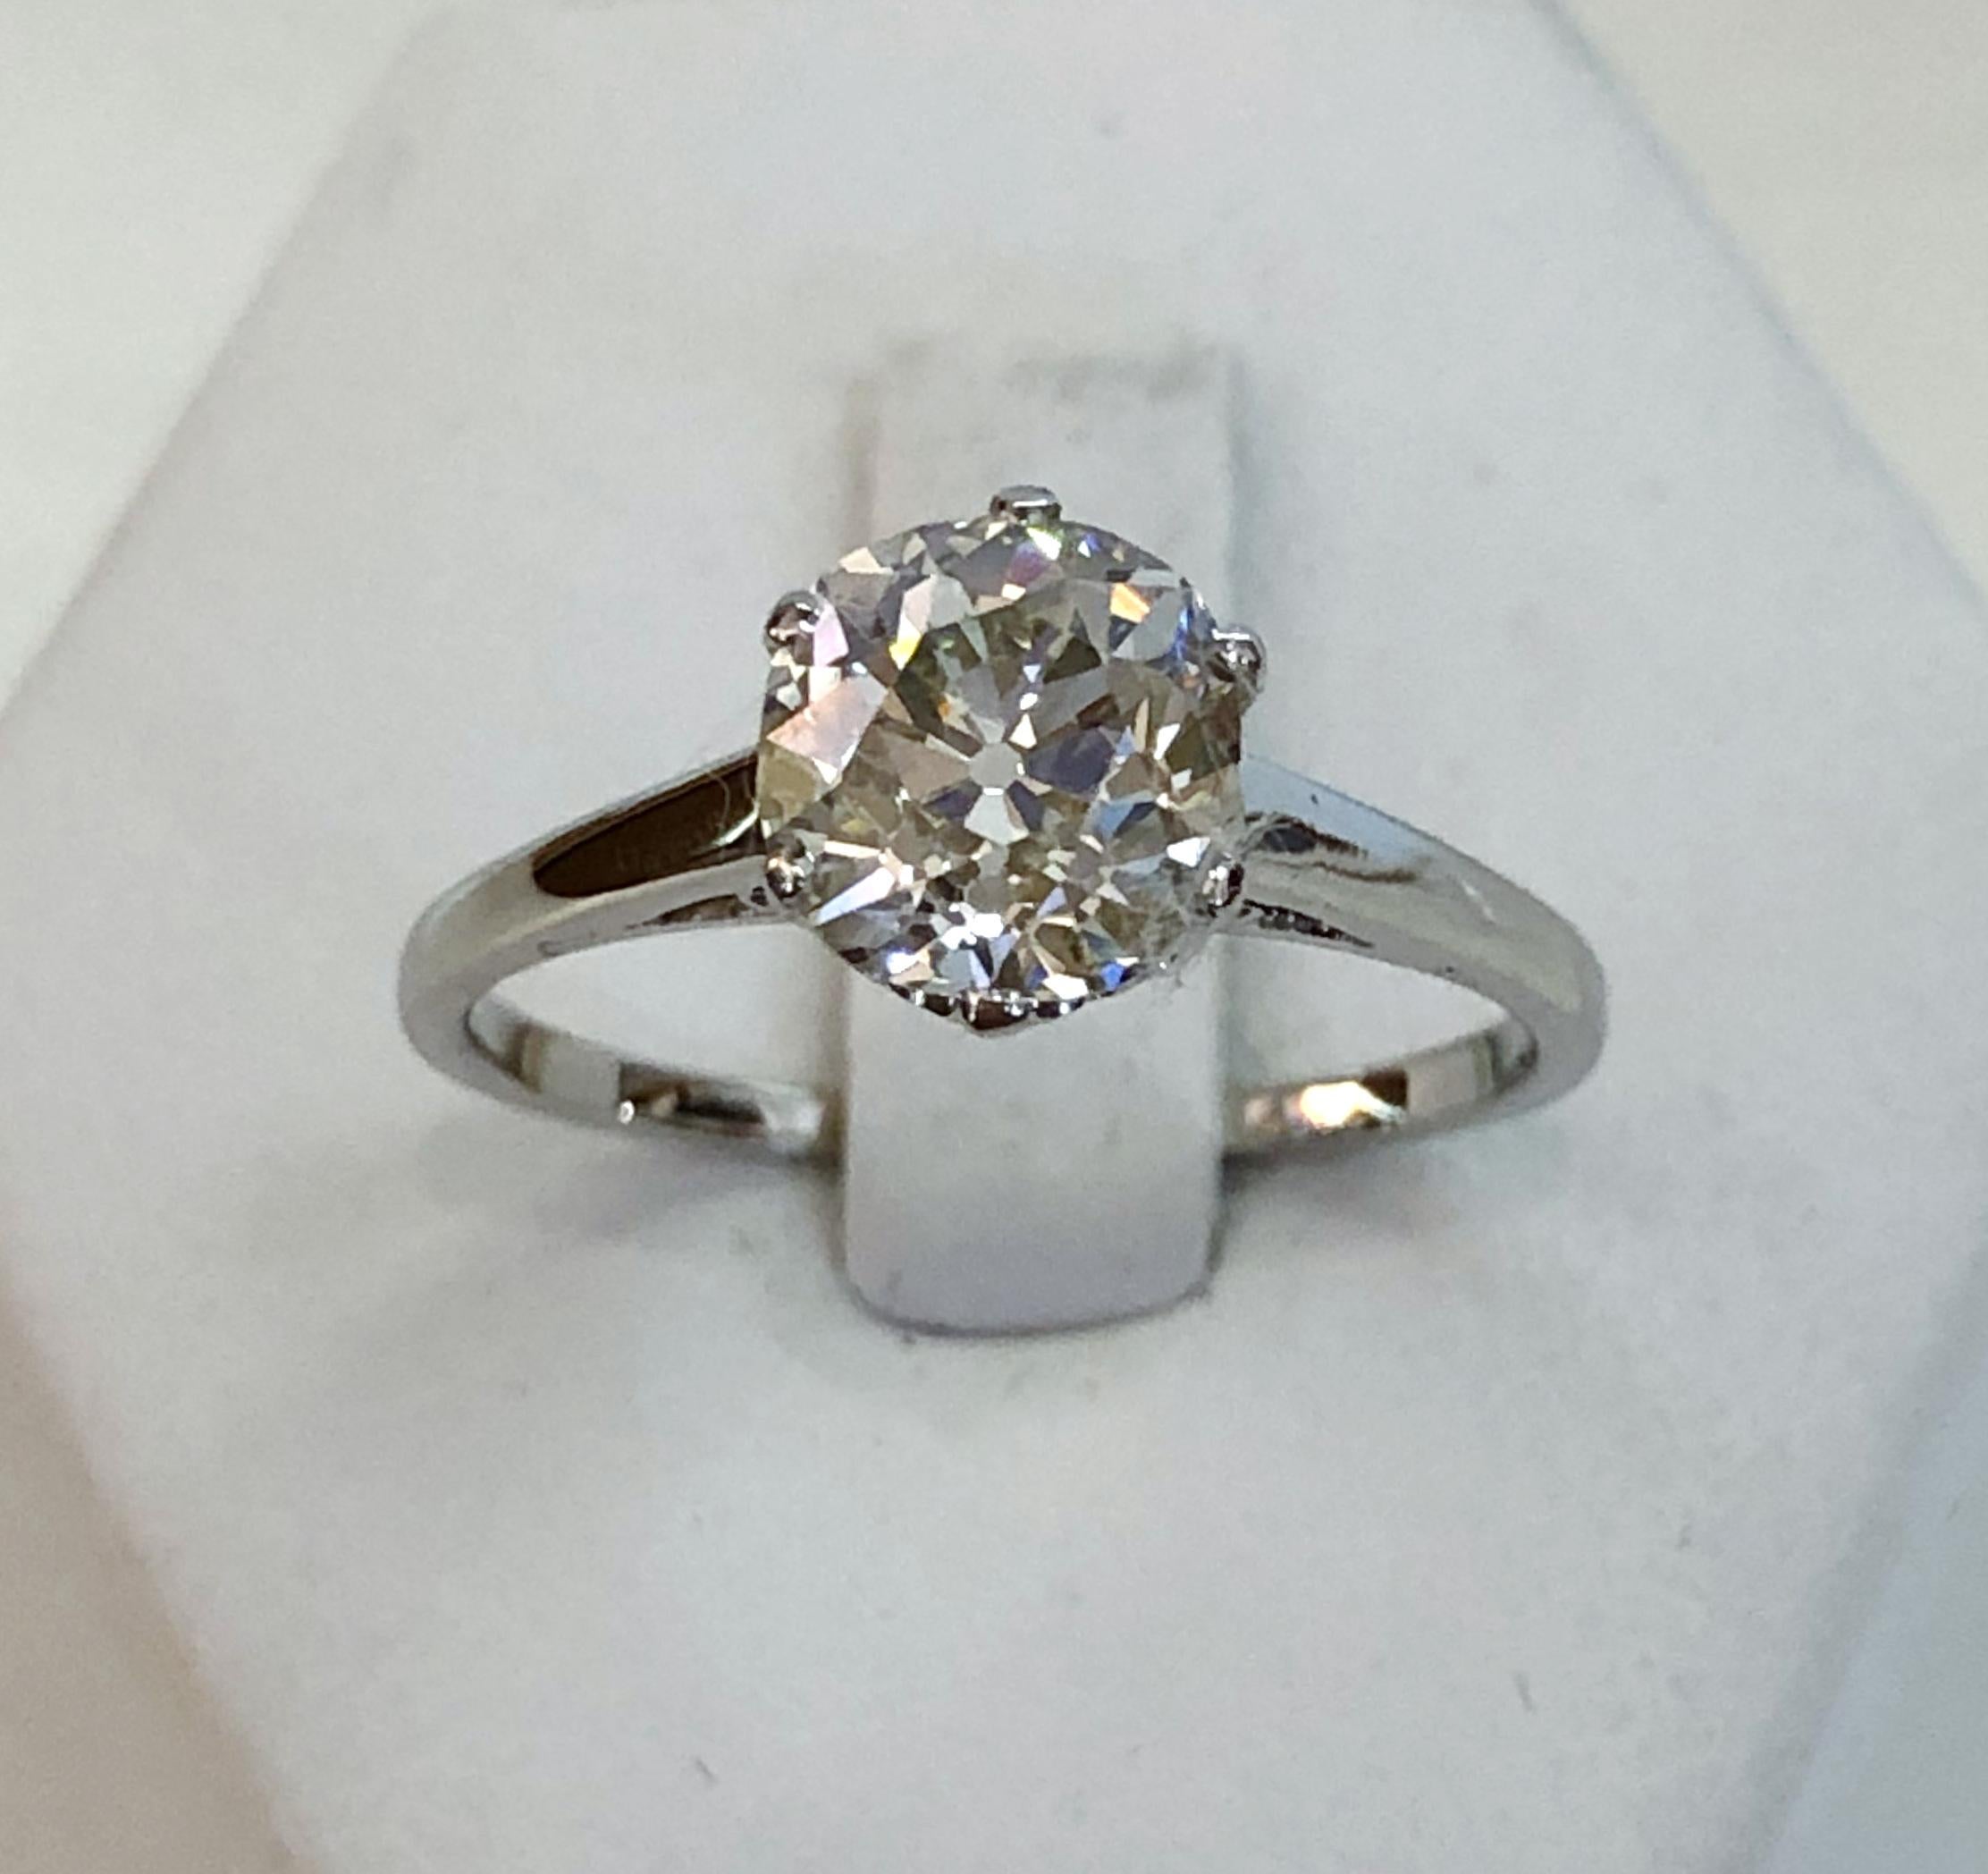 18 karat white gold ring with a single brilliant solitaire diamond of 1.35 karats / Italy 1930s
Ring size US 6.75